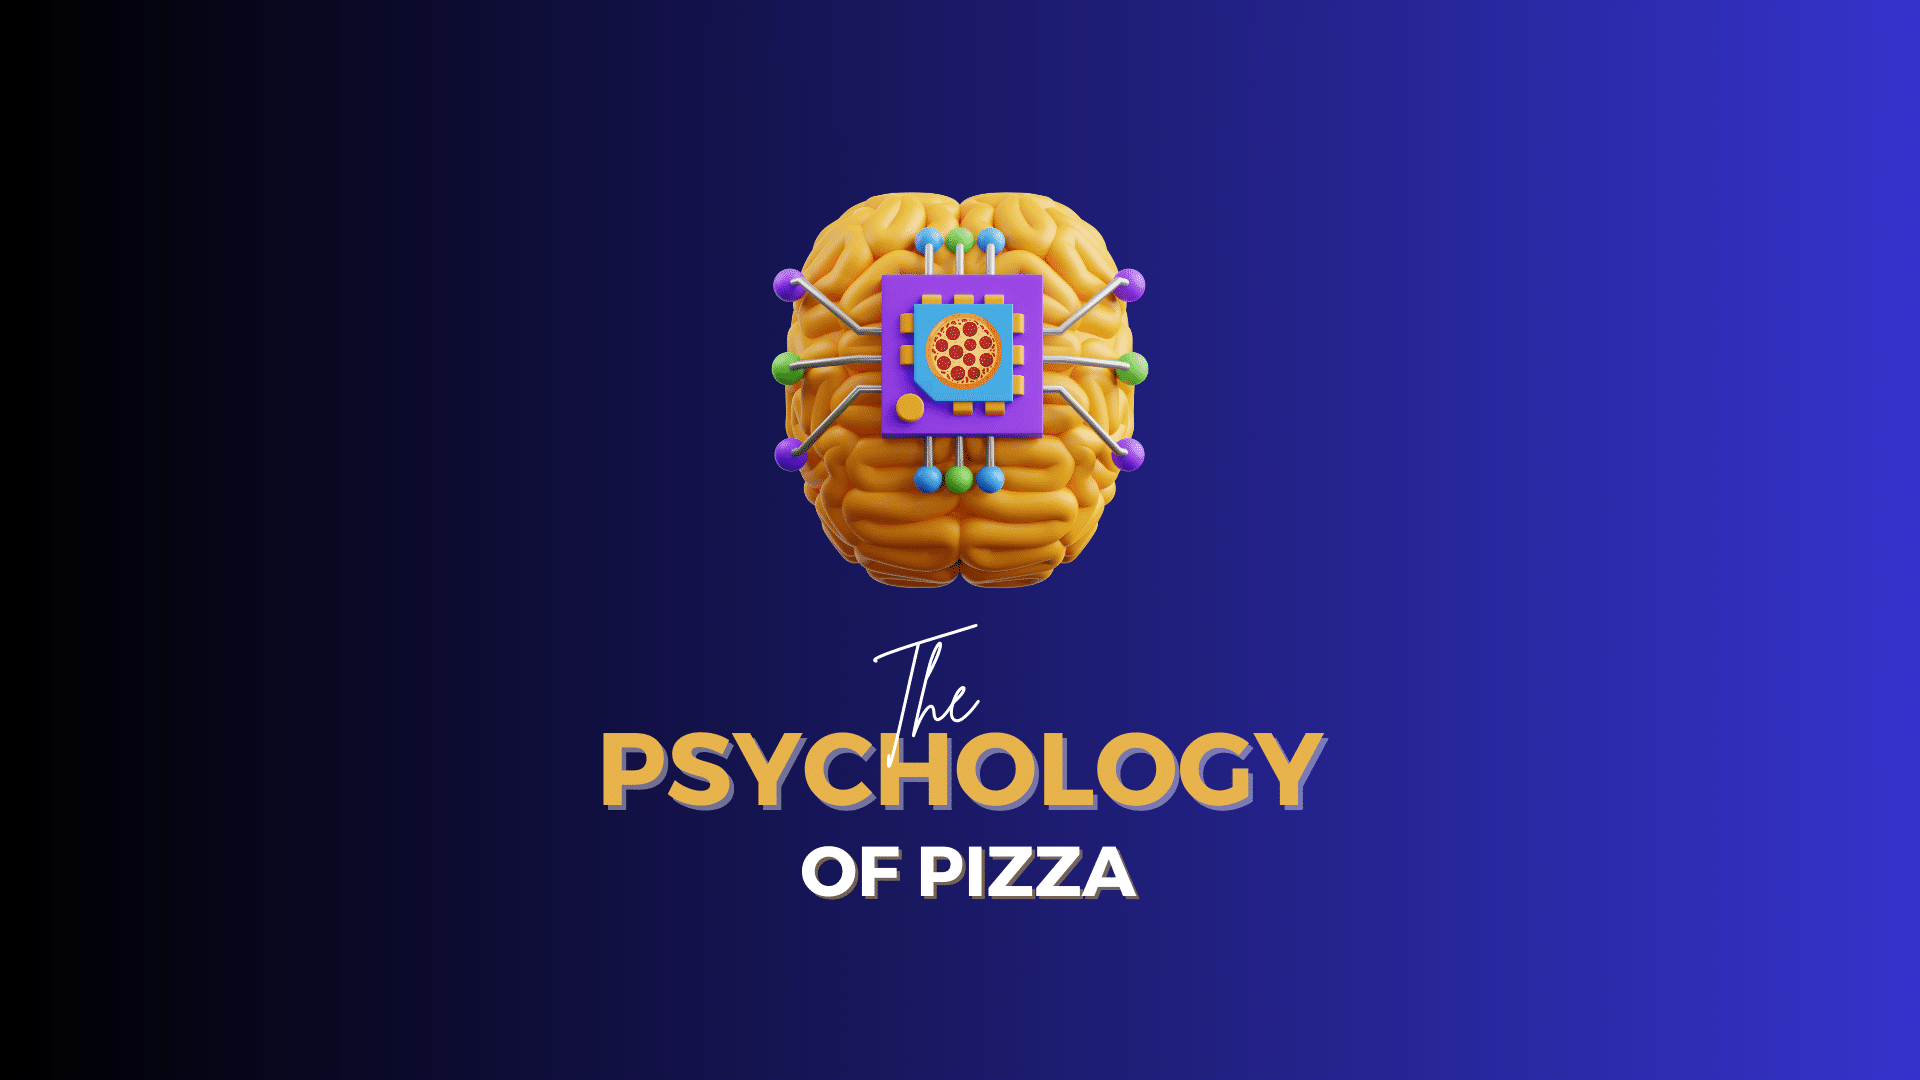 The Psychology of Pizza